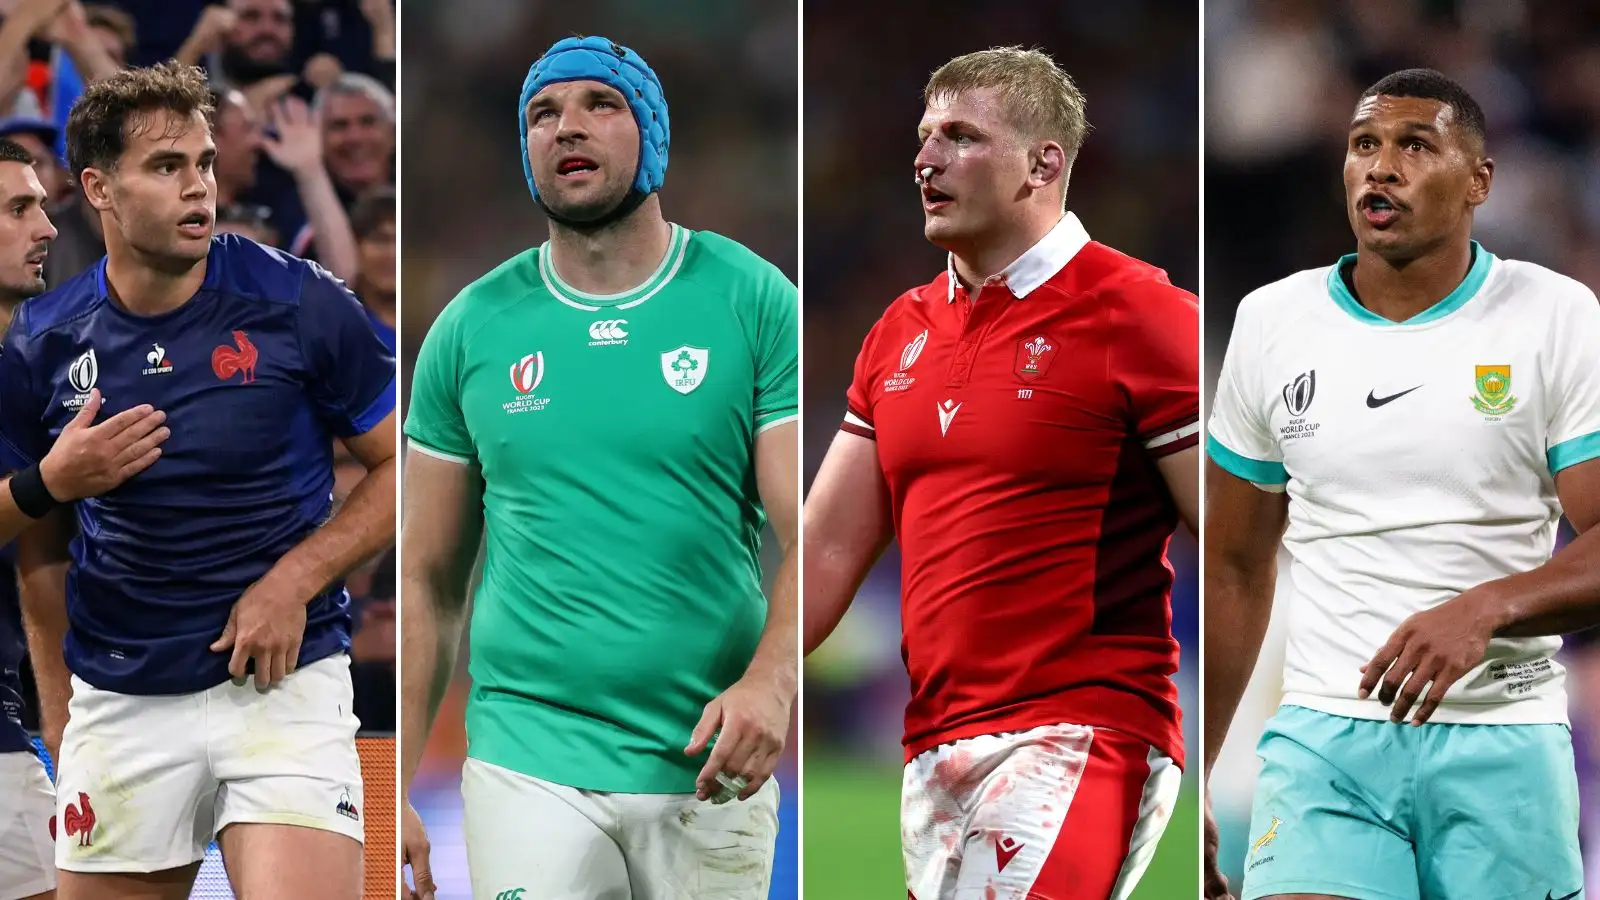 Rugby World Cup - France's Damian Penaud, Ireland's Tadhg Beirne, Wales' Jac Morgan, Springboks Damian Willemse